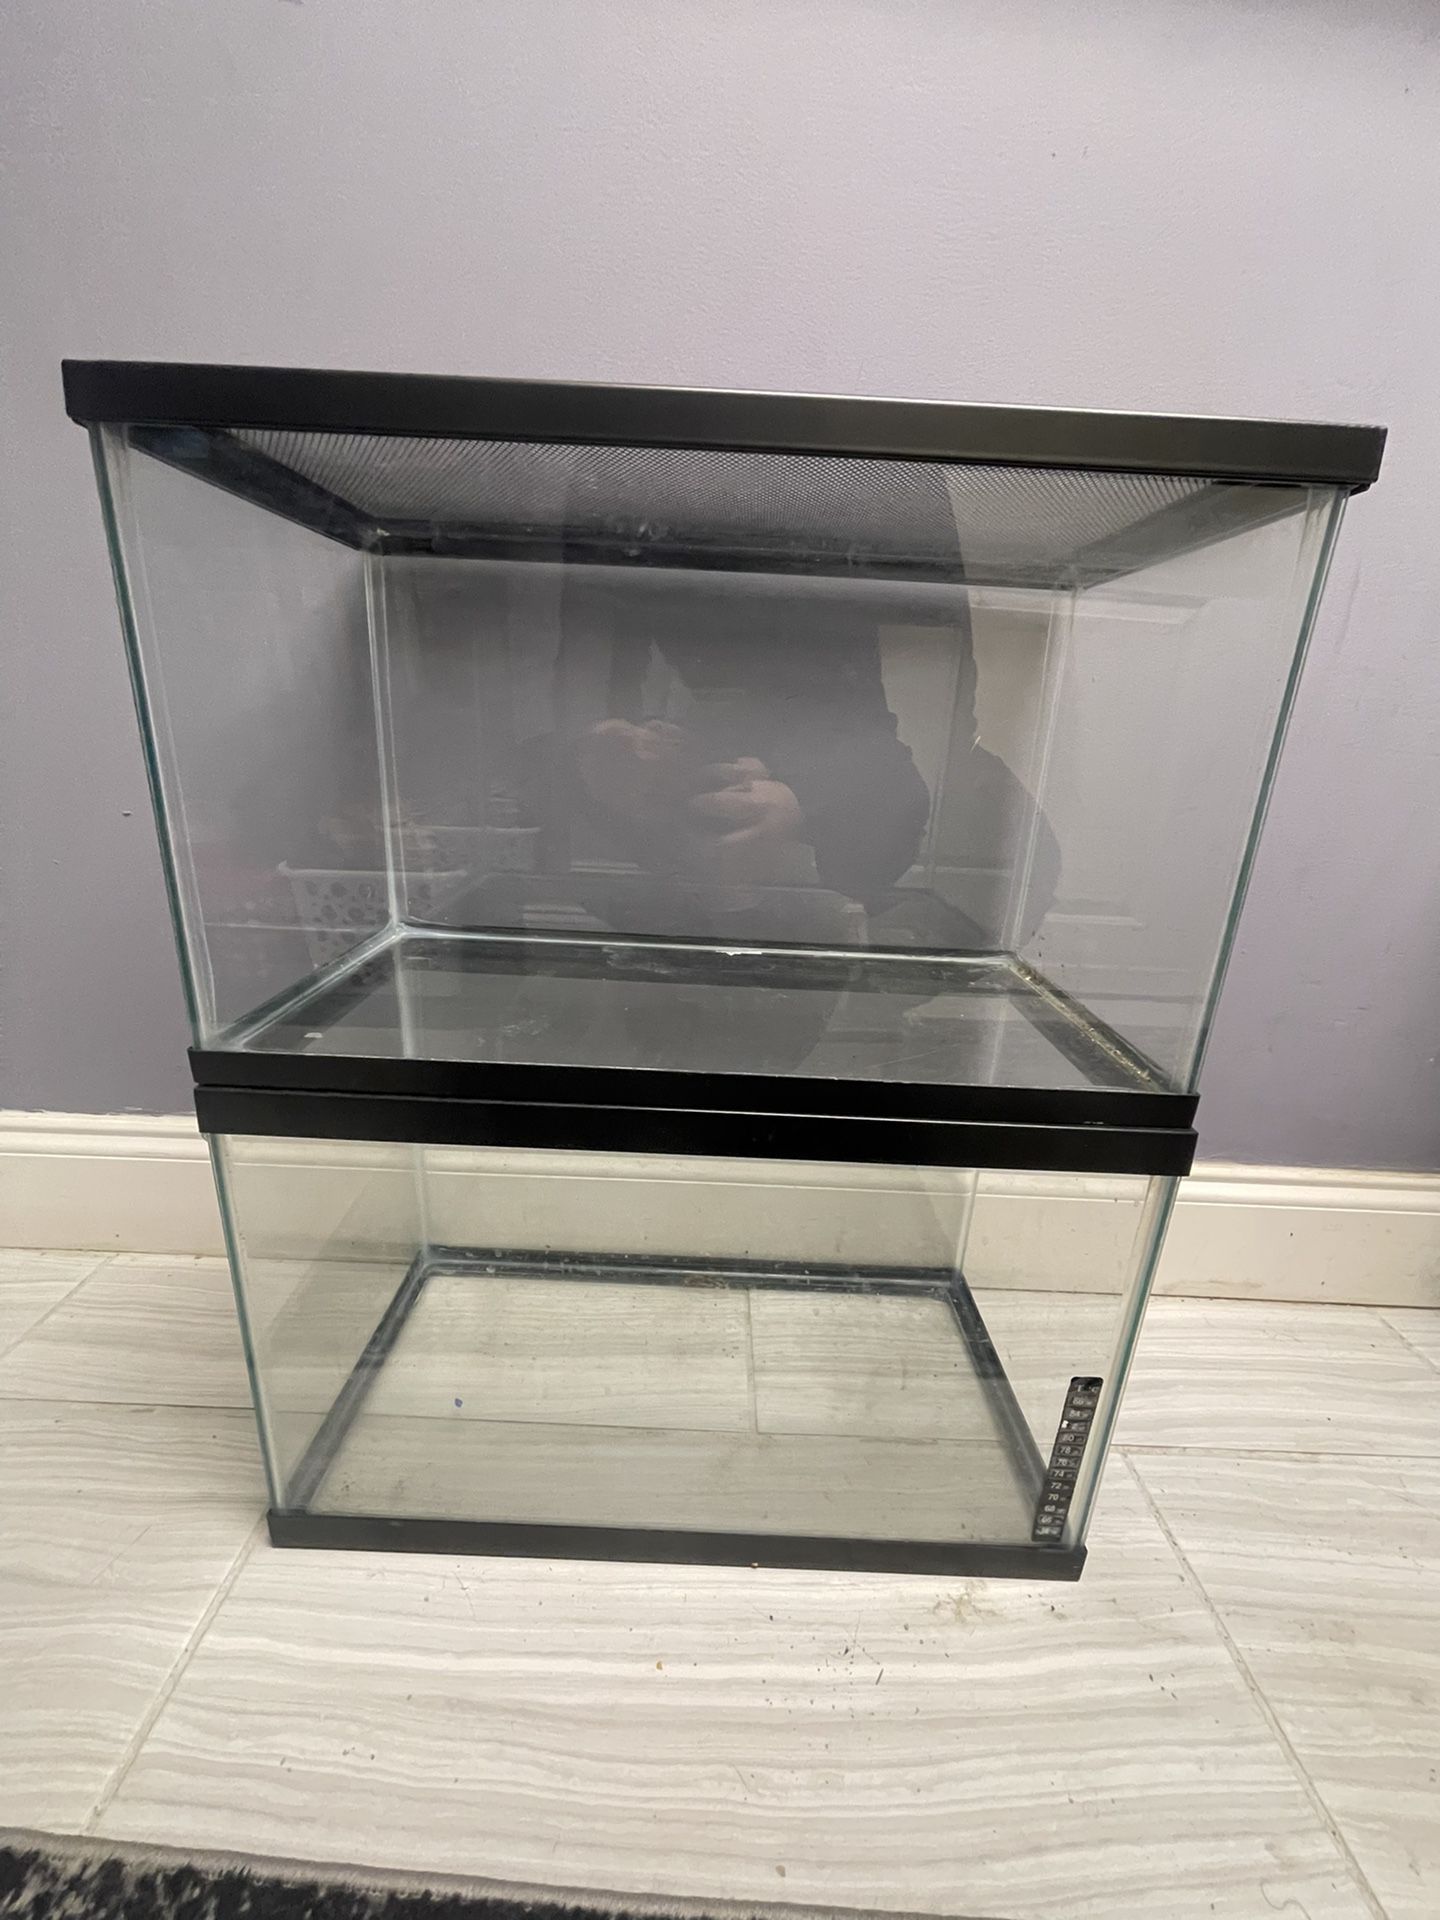 10 Gallon Tanks (two) Best Offer